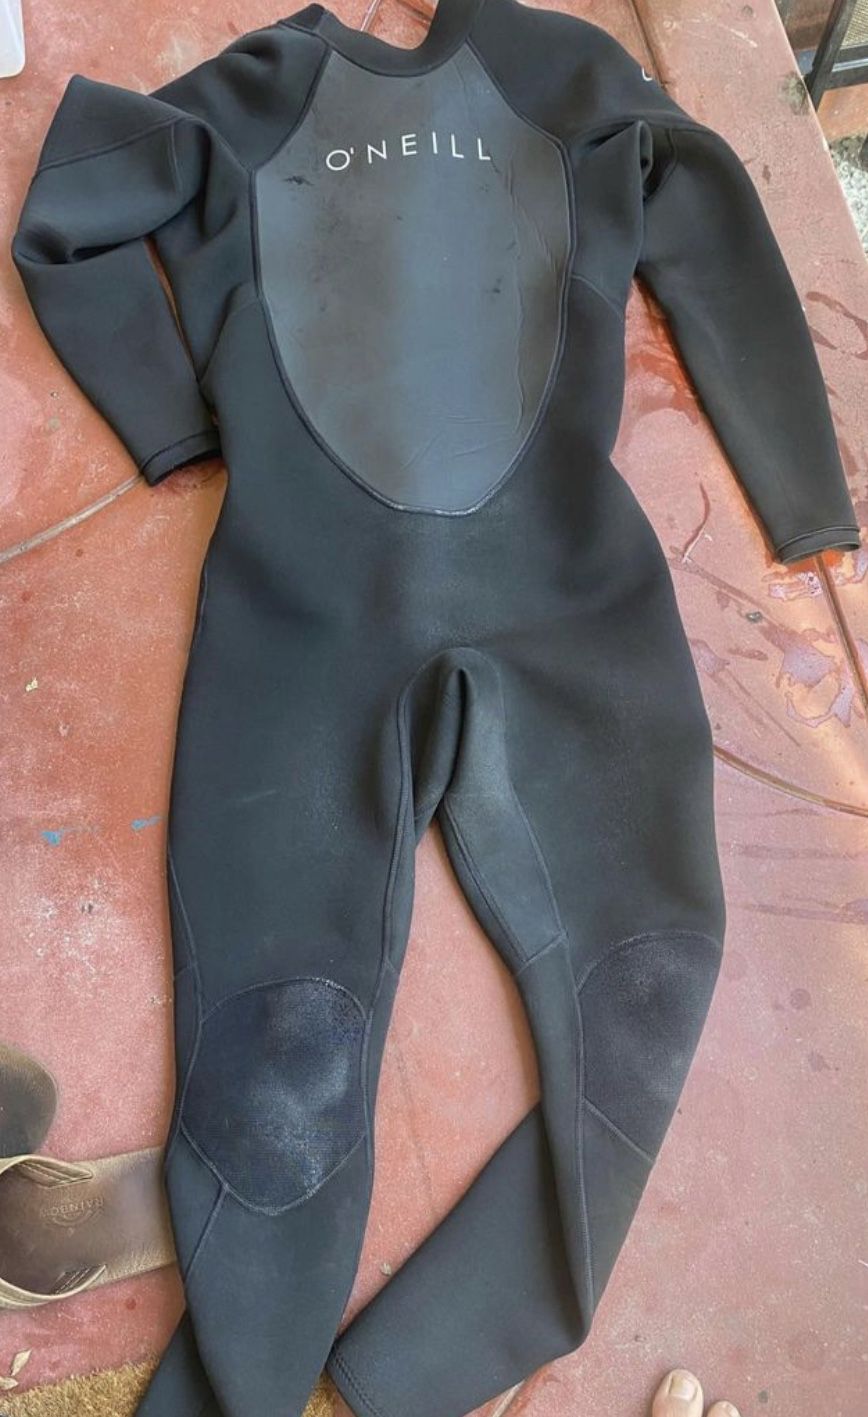 O’Neill Wetsuit Size XL And L